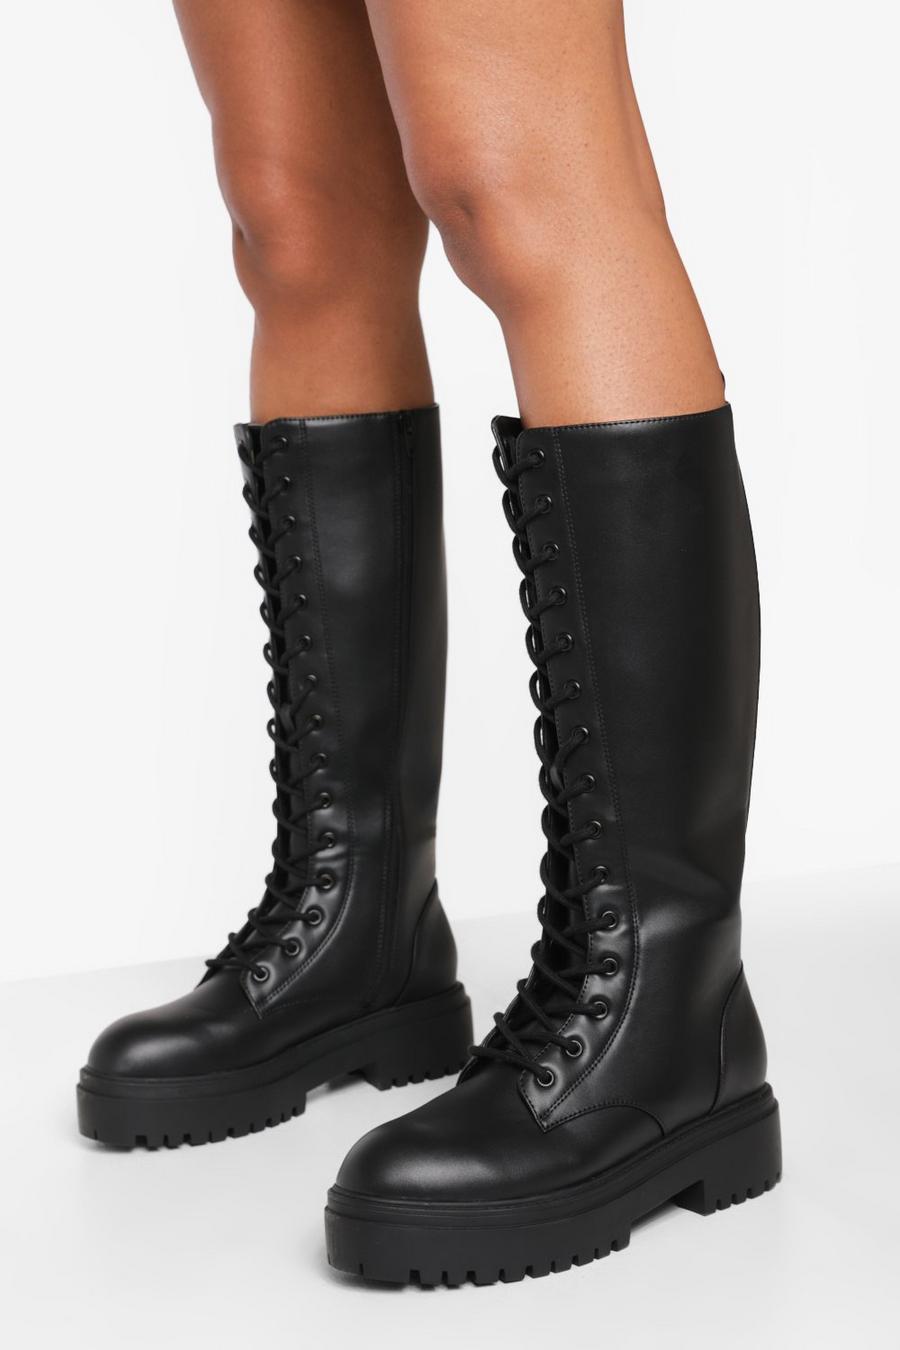 cruise get Least Knee High Lace Up Combat Boots | boohoo